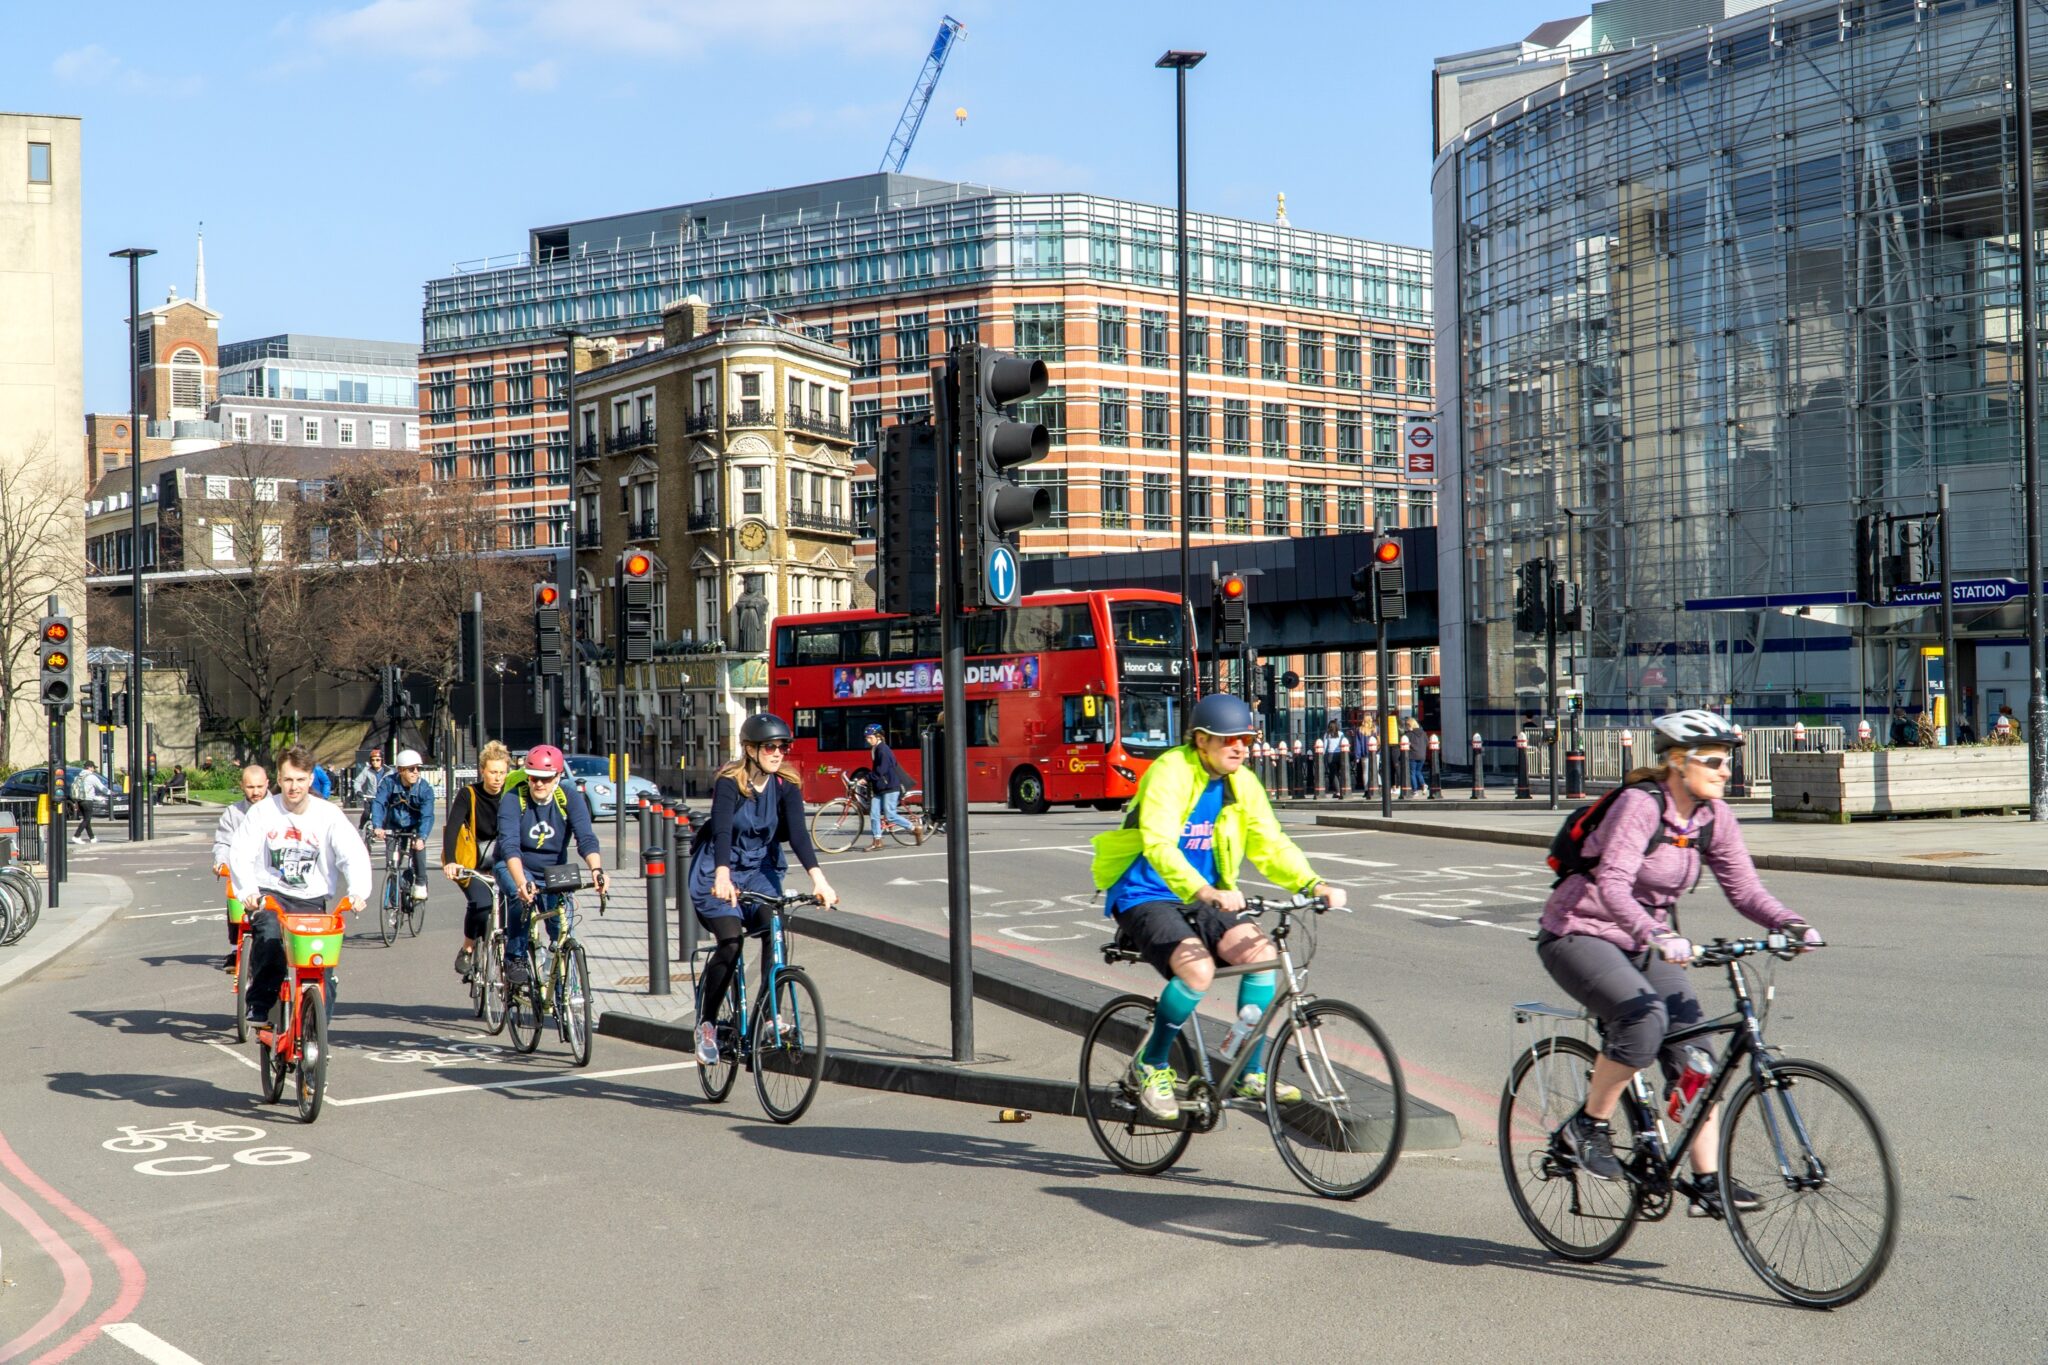 United Kingdom: Government wants to encourage its people to get around on foot and by bicycle